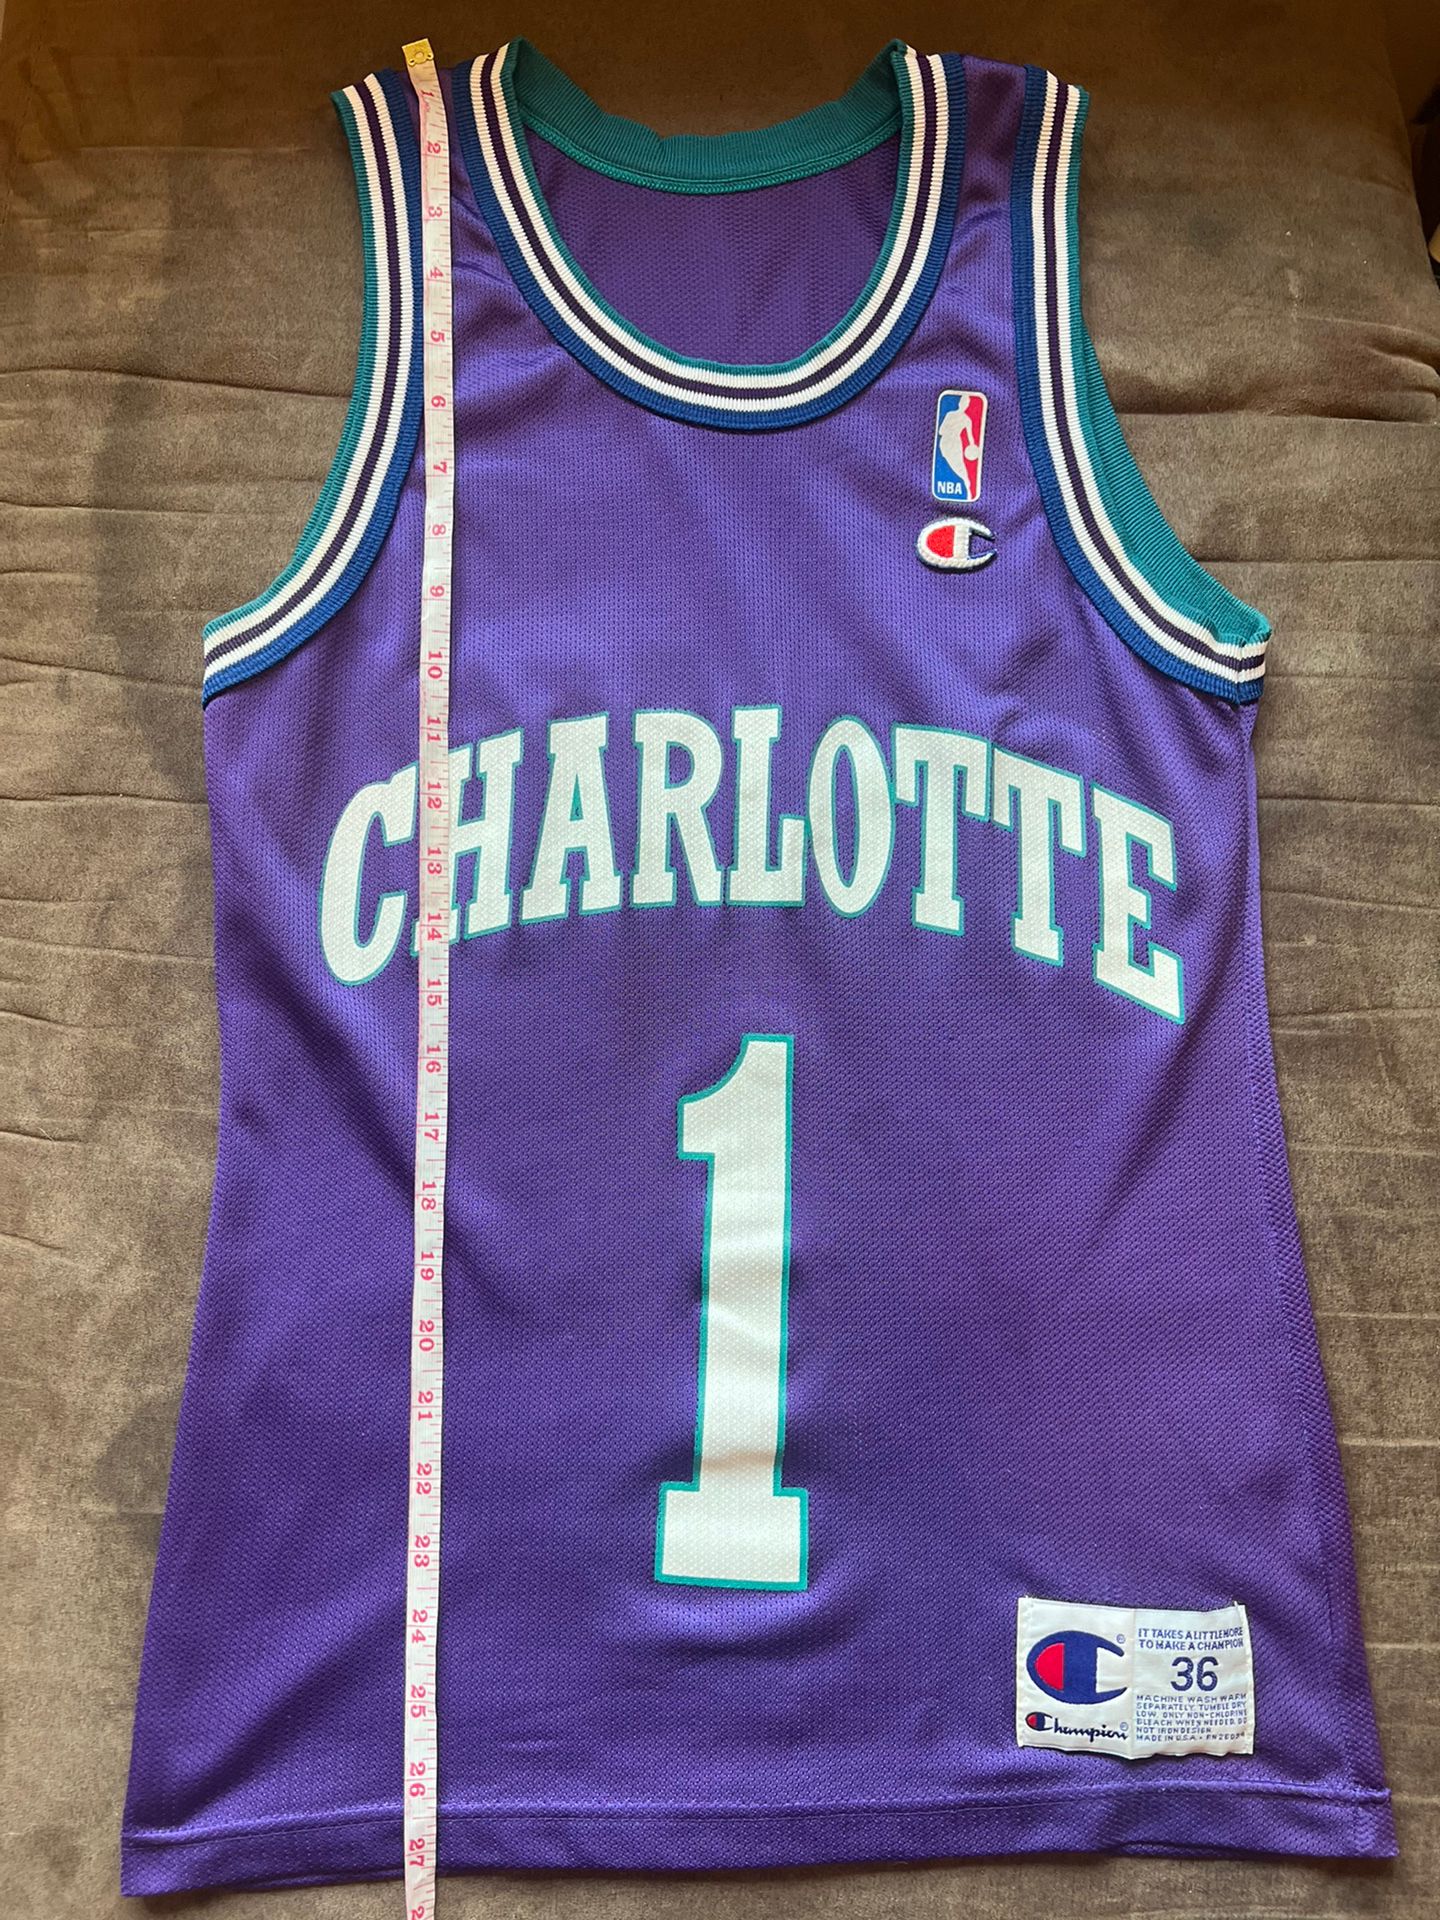 Vintage 90s Charlotte Hornets Champion Muggsy Bogues Jersey for Sale in  South Setauket, NY - OfferUp